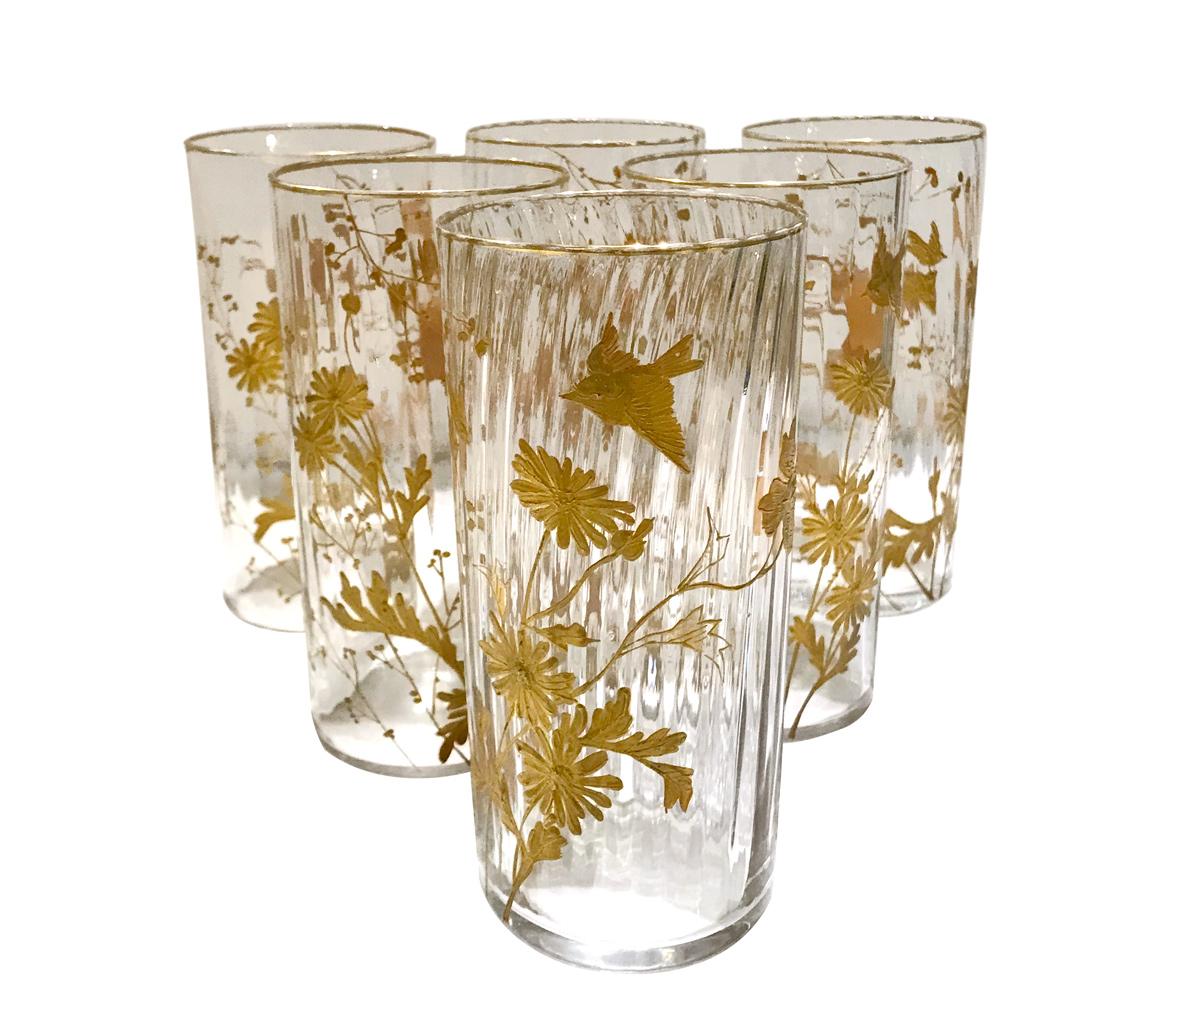 Very refined set of Orangeade set composed of 1 jug and 6 glasses. Made of blown glass decorated with gold Japonisme-inspired patterns of birds, flowers and dragonflies. 
Produced by Maison Toy, a french luxury house specializing in both porcelain